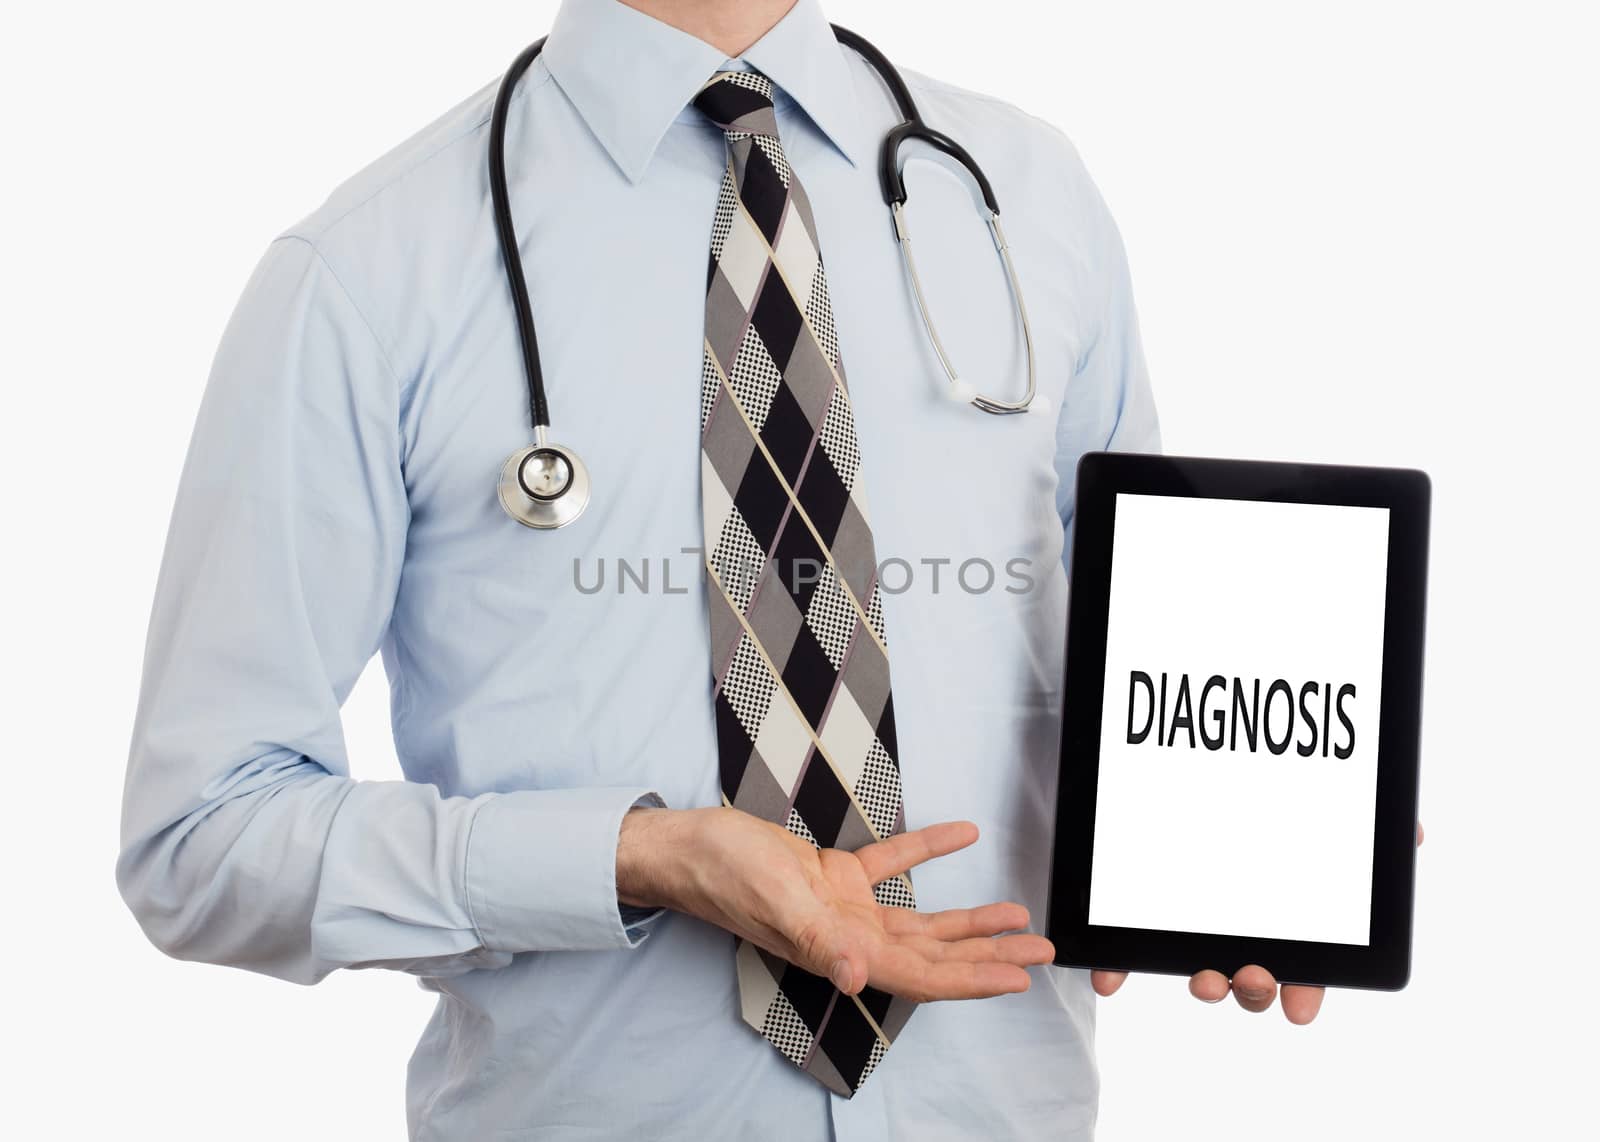 Doctor, isolated on white background,  holding digital tablet - Diagnosis